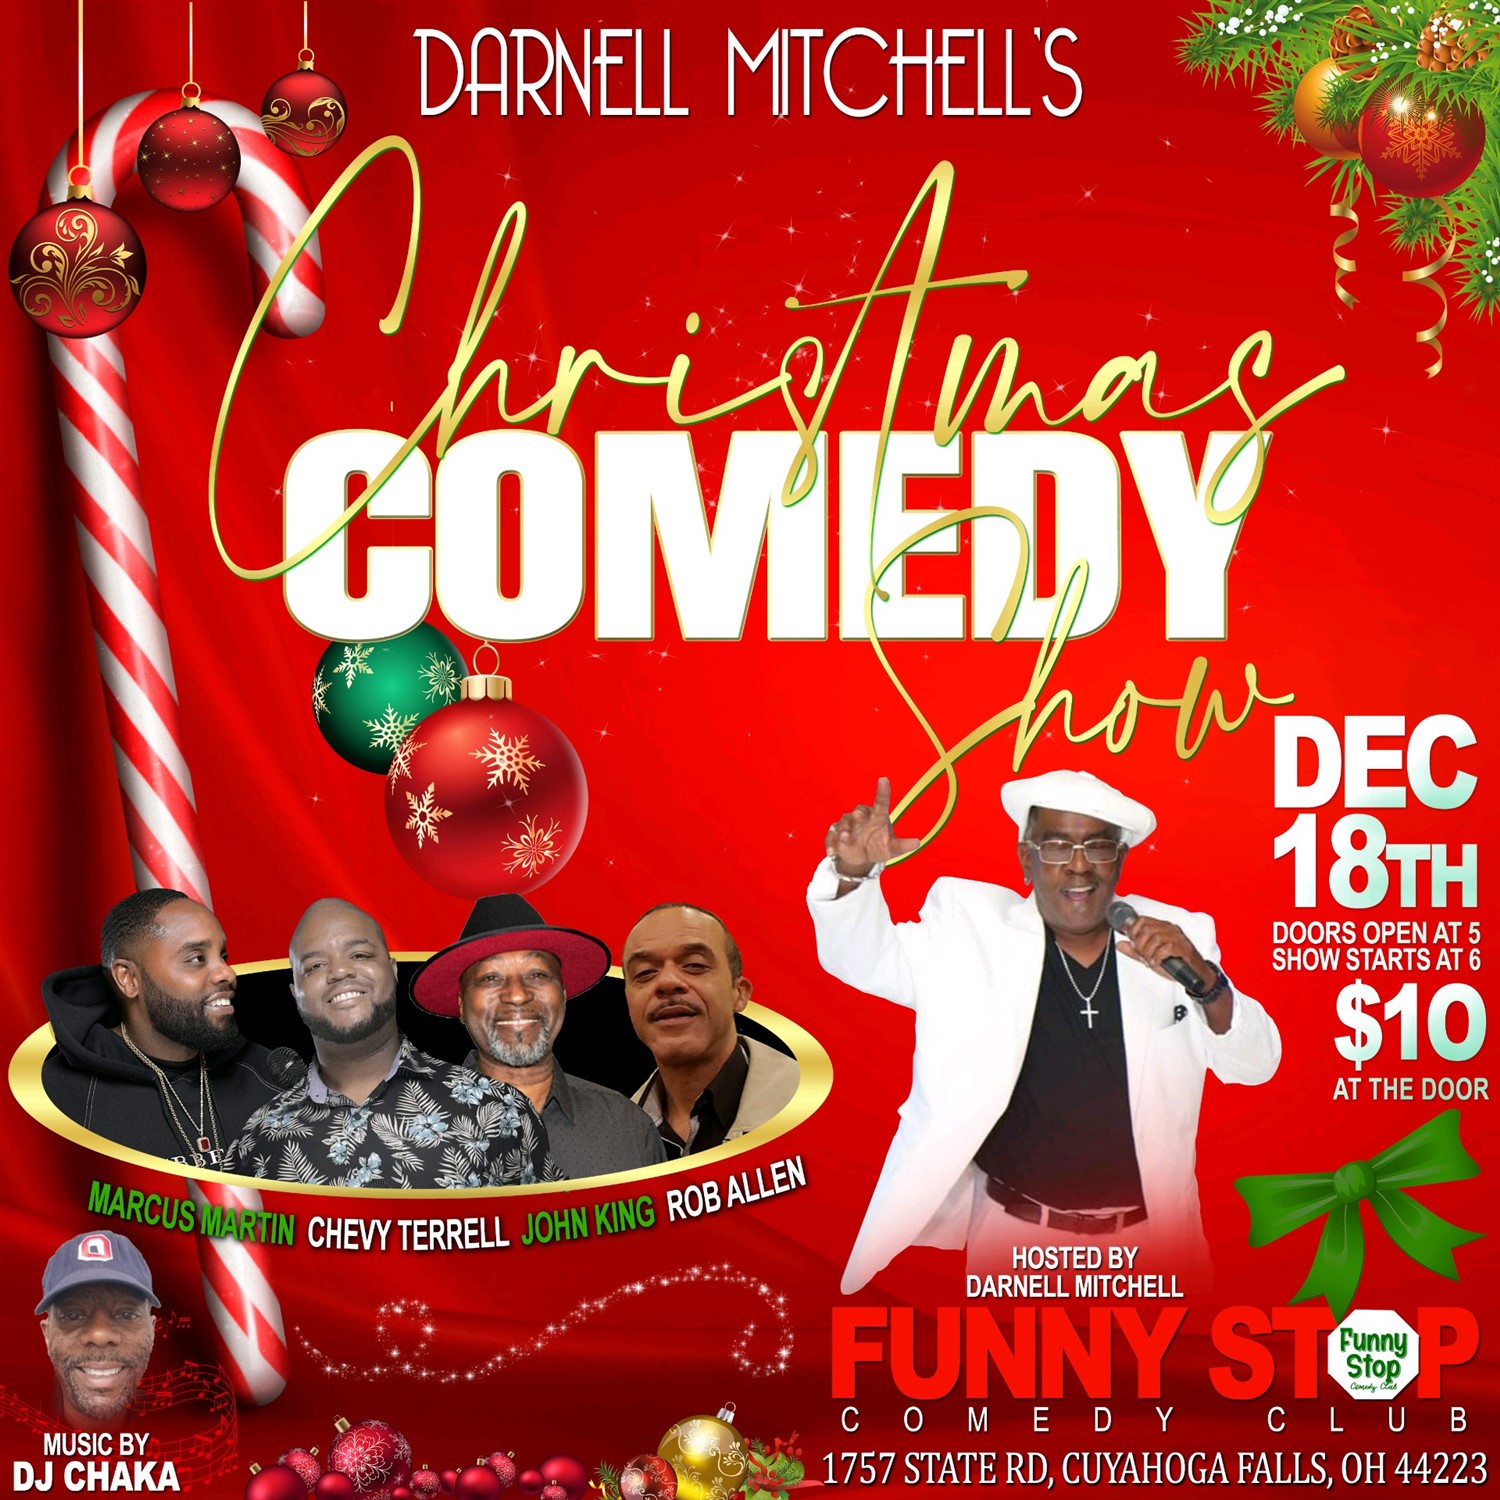 Christmas Comedy Show hosted by Darnell Mitchell featuring Marcus Martin, Chevy Terrell, John King, Rob Allen, and DJ Chaka at Funny Stop Comedy Club on dic. 18, 18:00@Funny Stop Comedy Club - Compra entradas y obtén información enFunny Stop funnystop.online